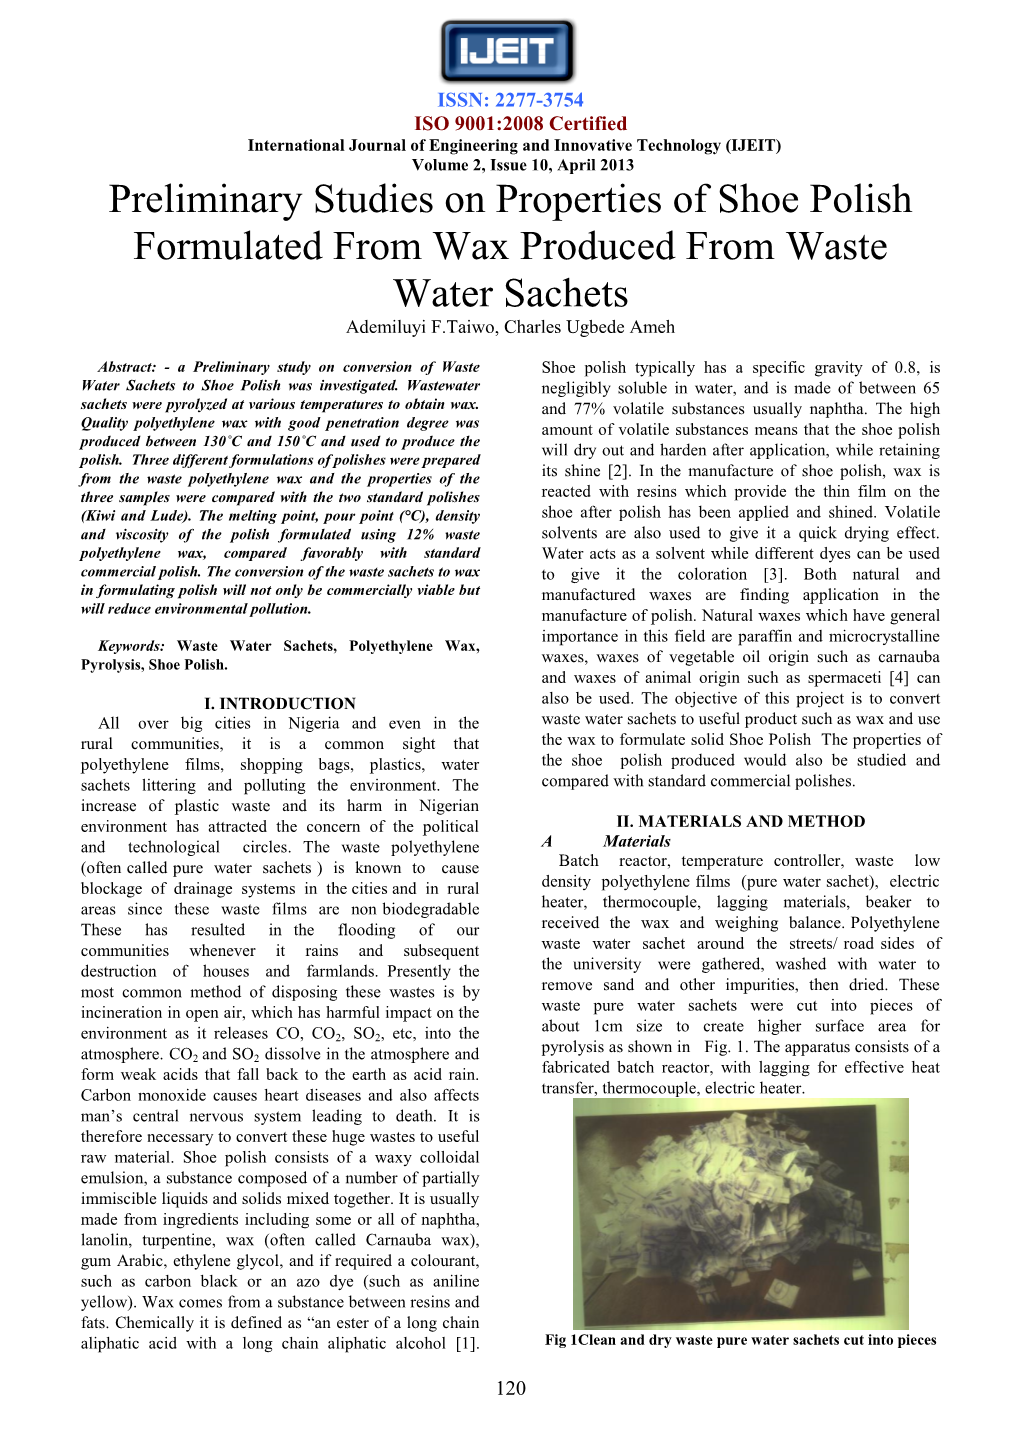 Preliminary Studies on Properties of Shoe Polish Formulated from Wax Produced from Waste Water Sachets Ademiluyi F.Taiwo, Charles Ugbede Ameh